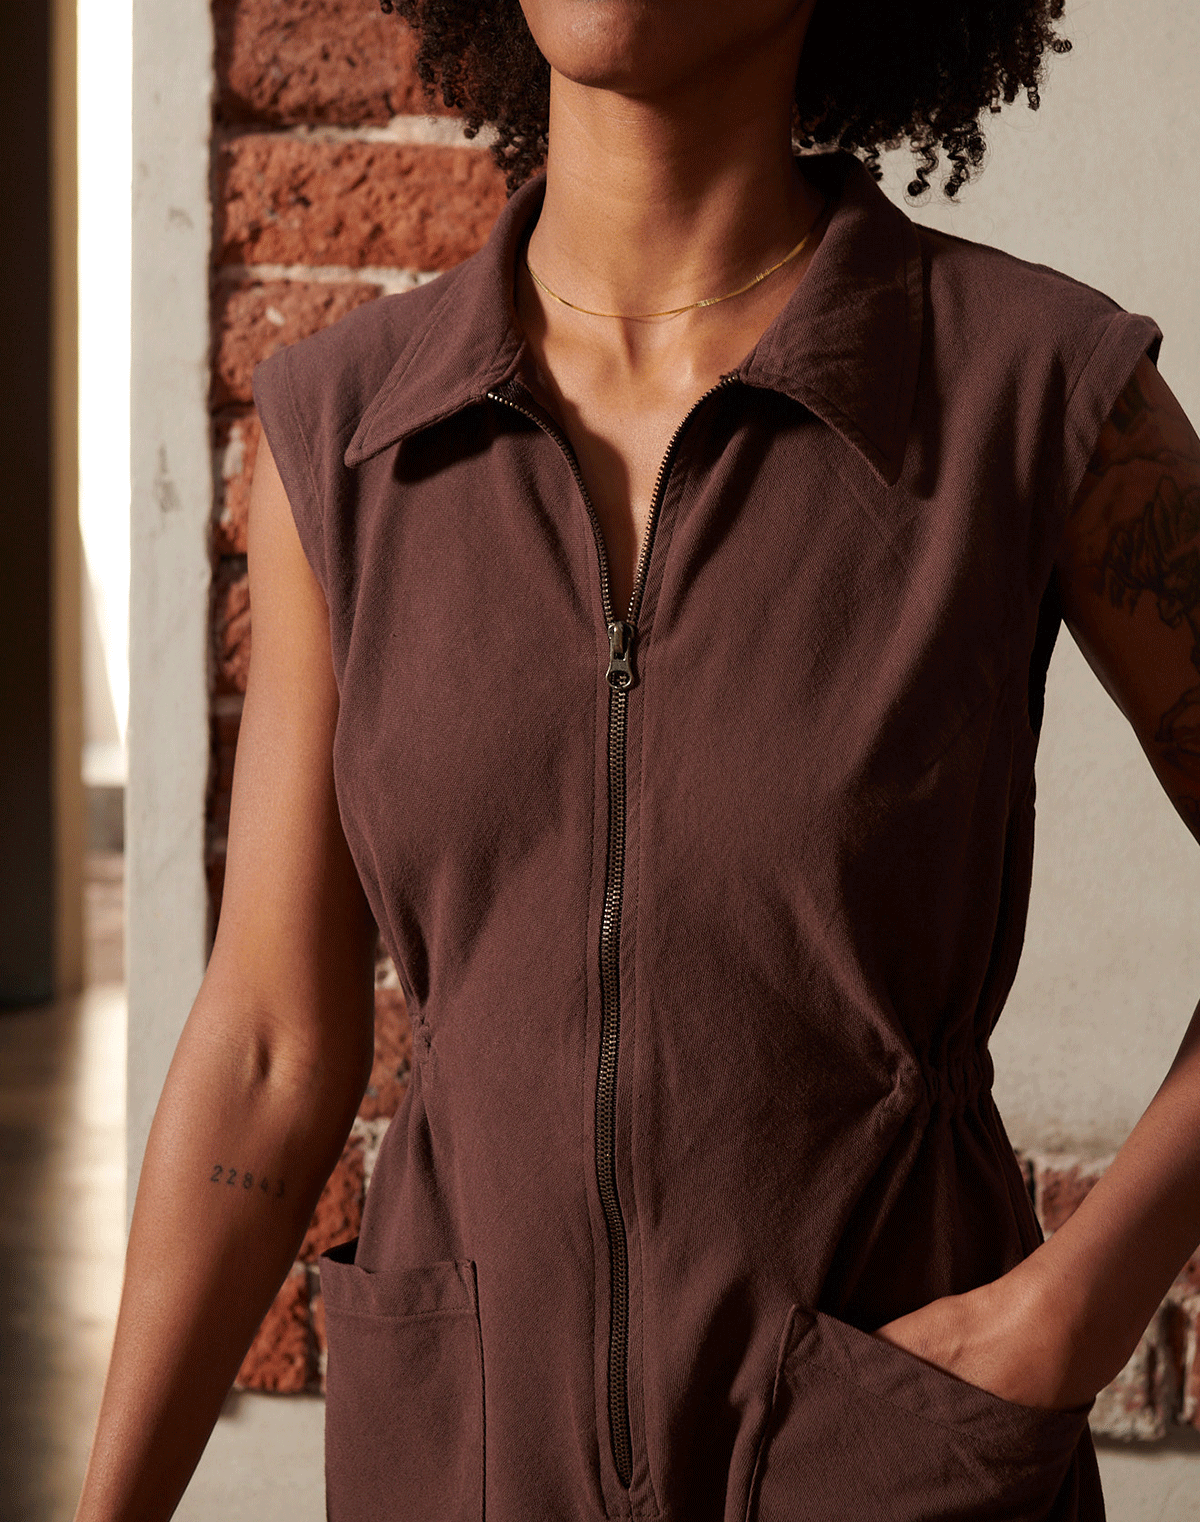 Noble Sleeveless Utility Romper Tank Suit in chocolate